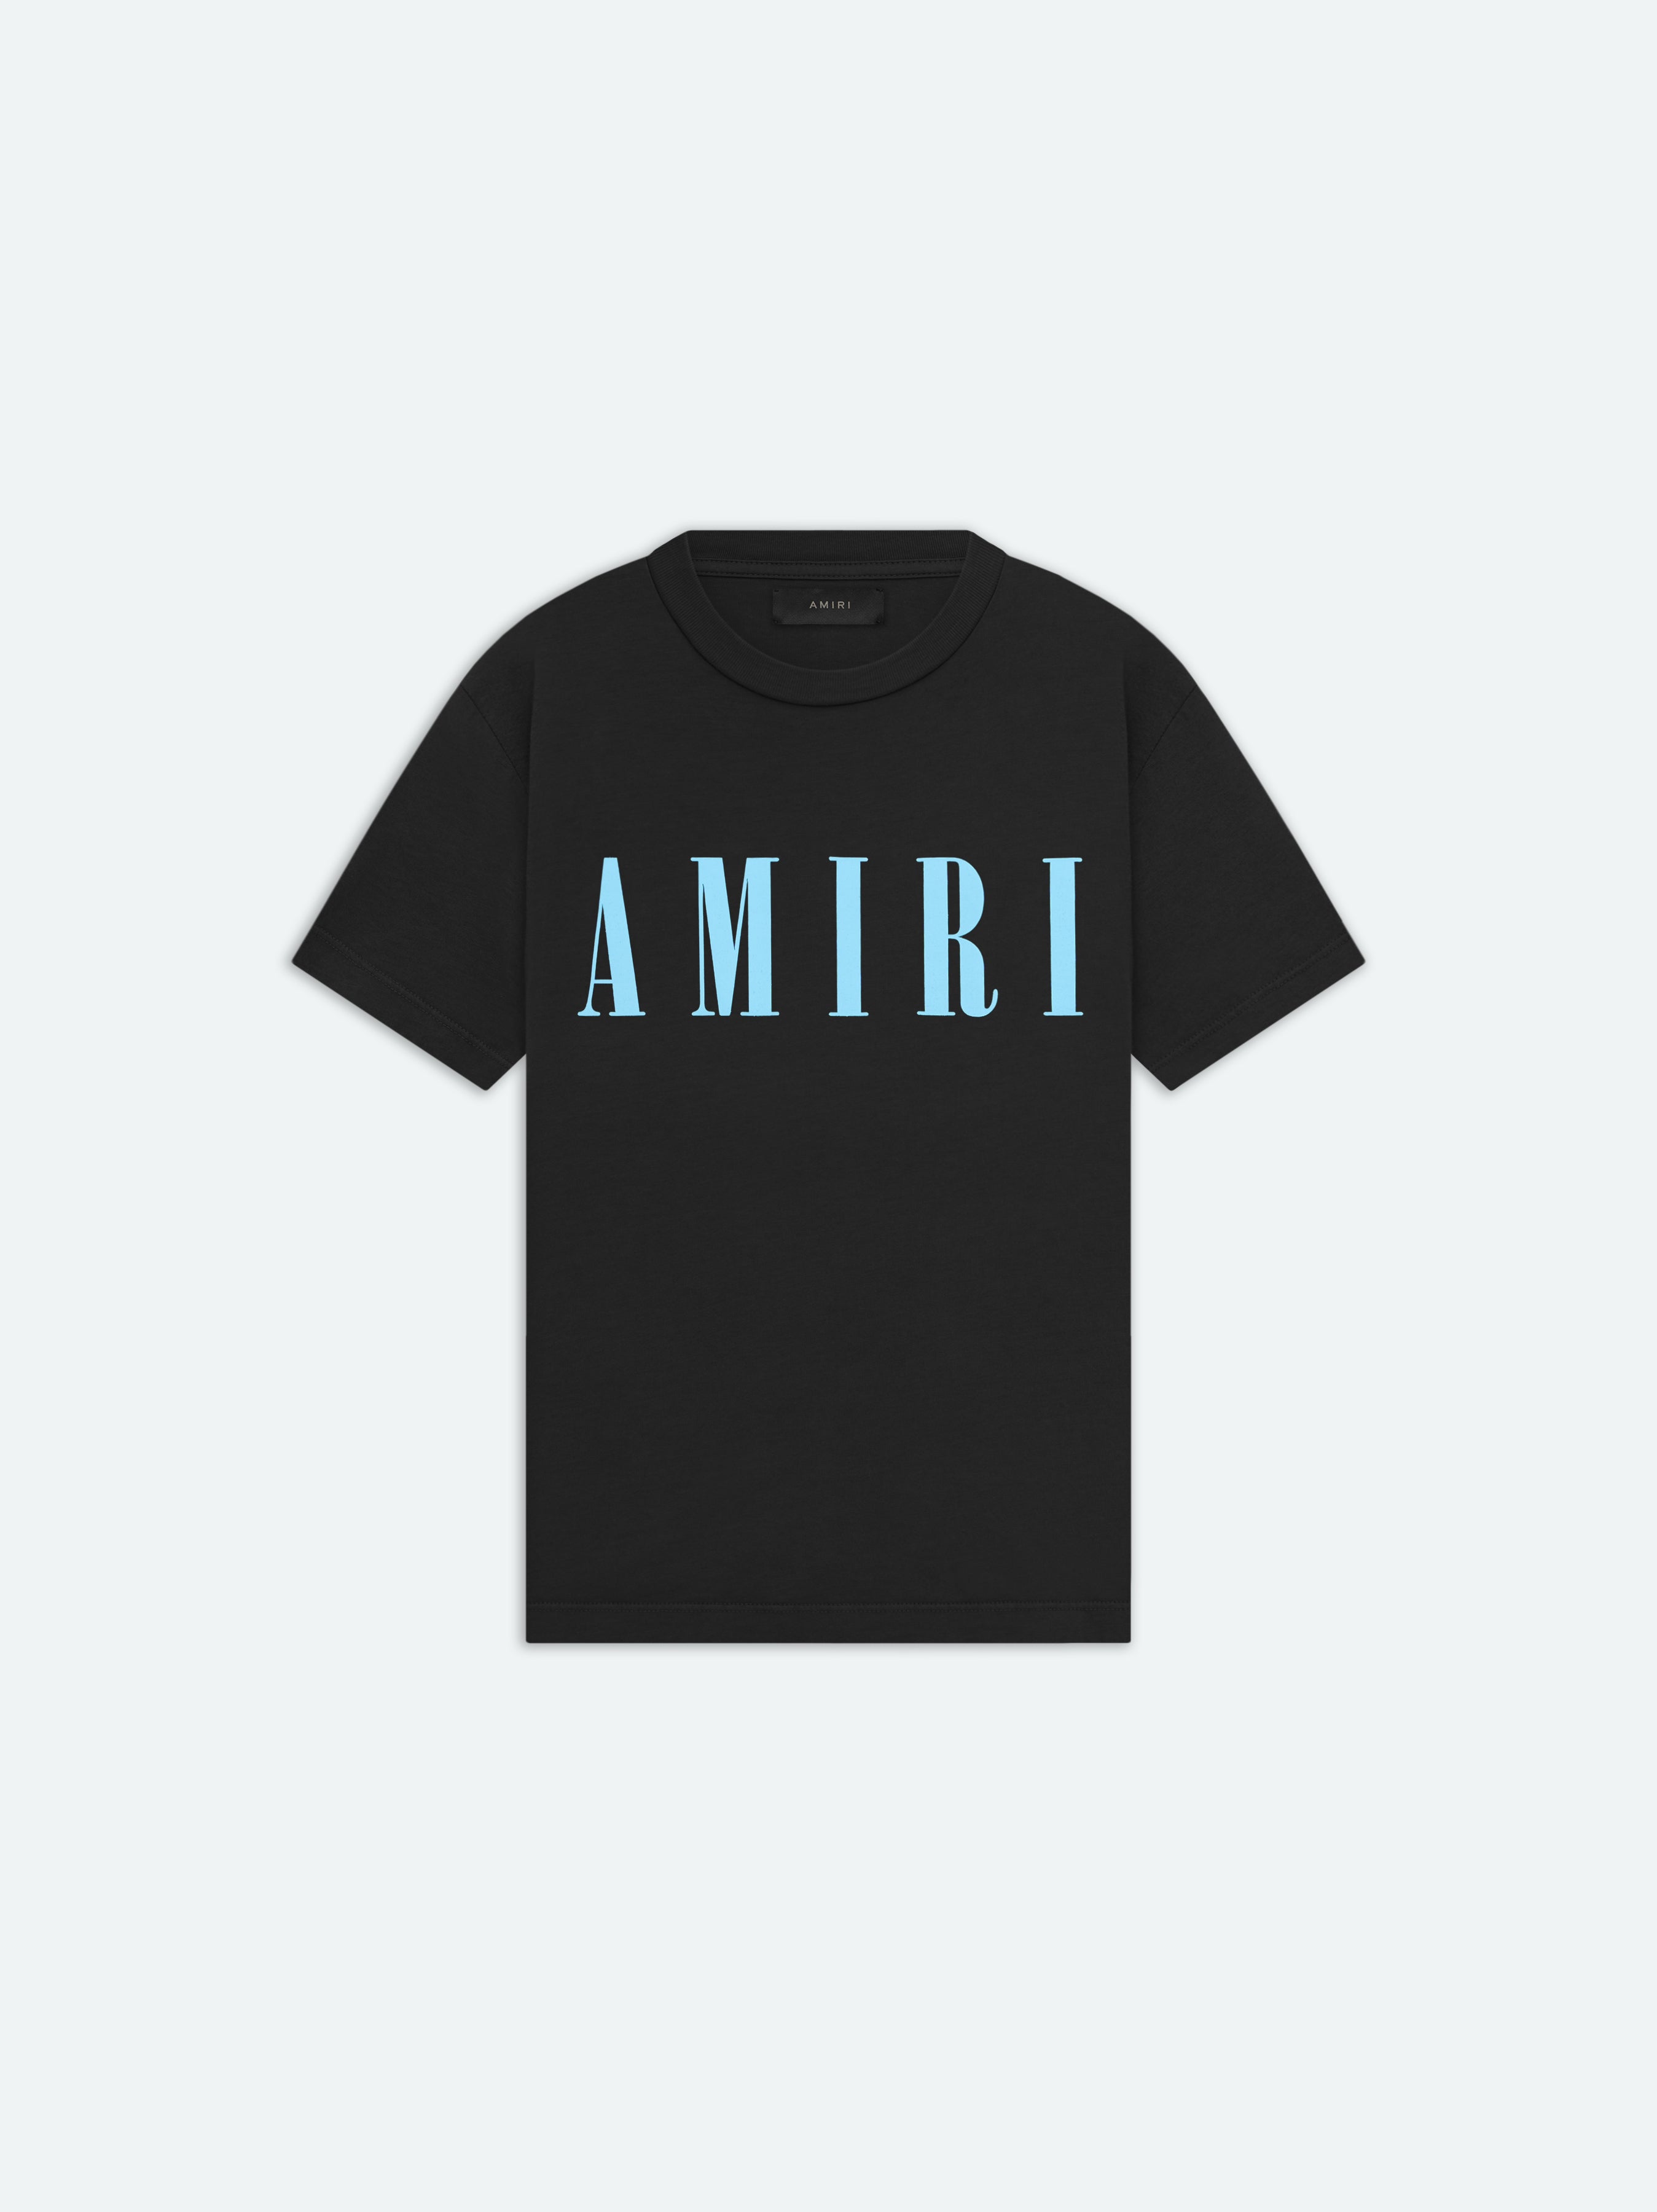 Product WOMEN - CORE LOGO SLIM FIT TEE - Black featured image